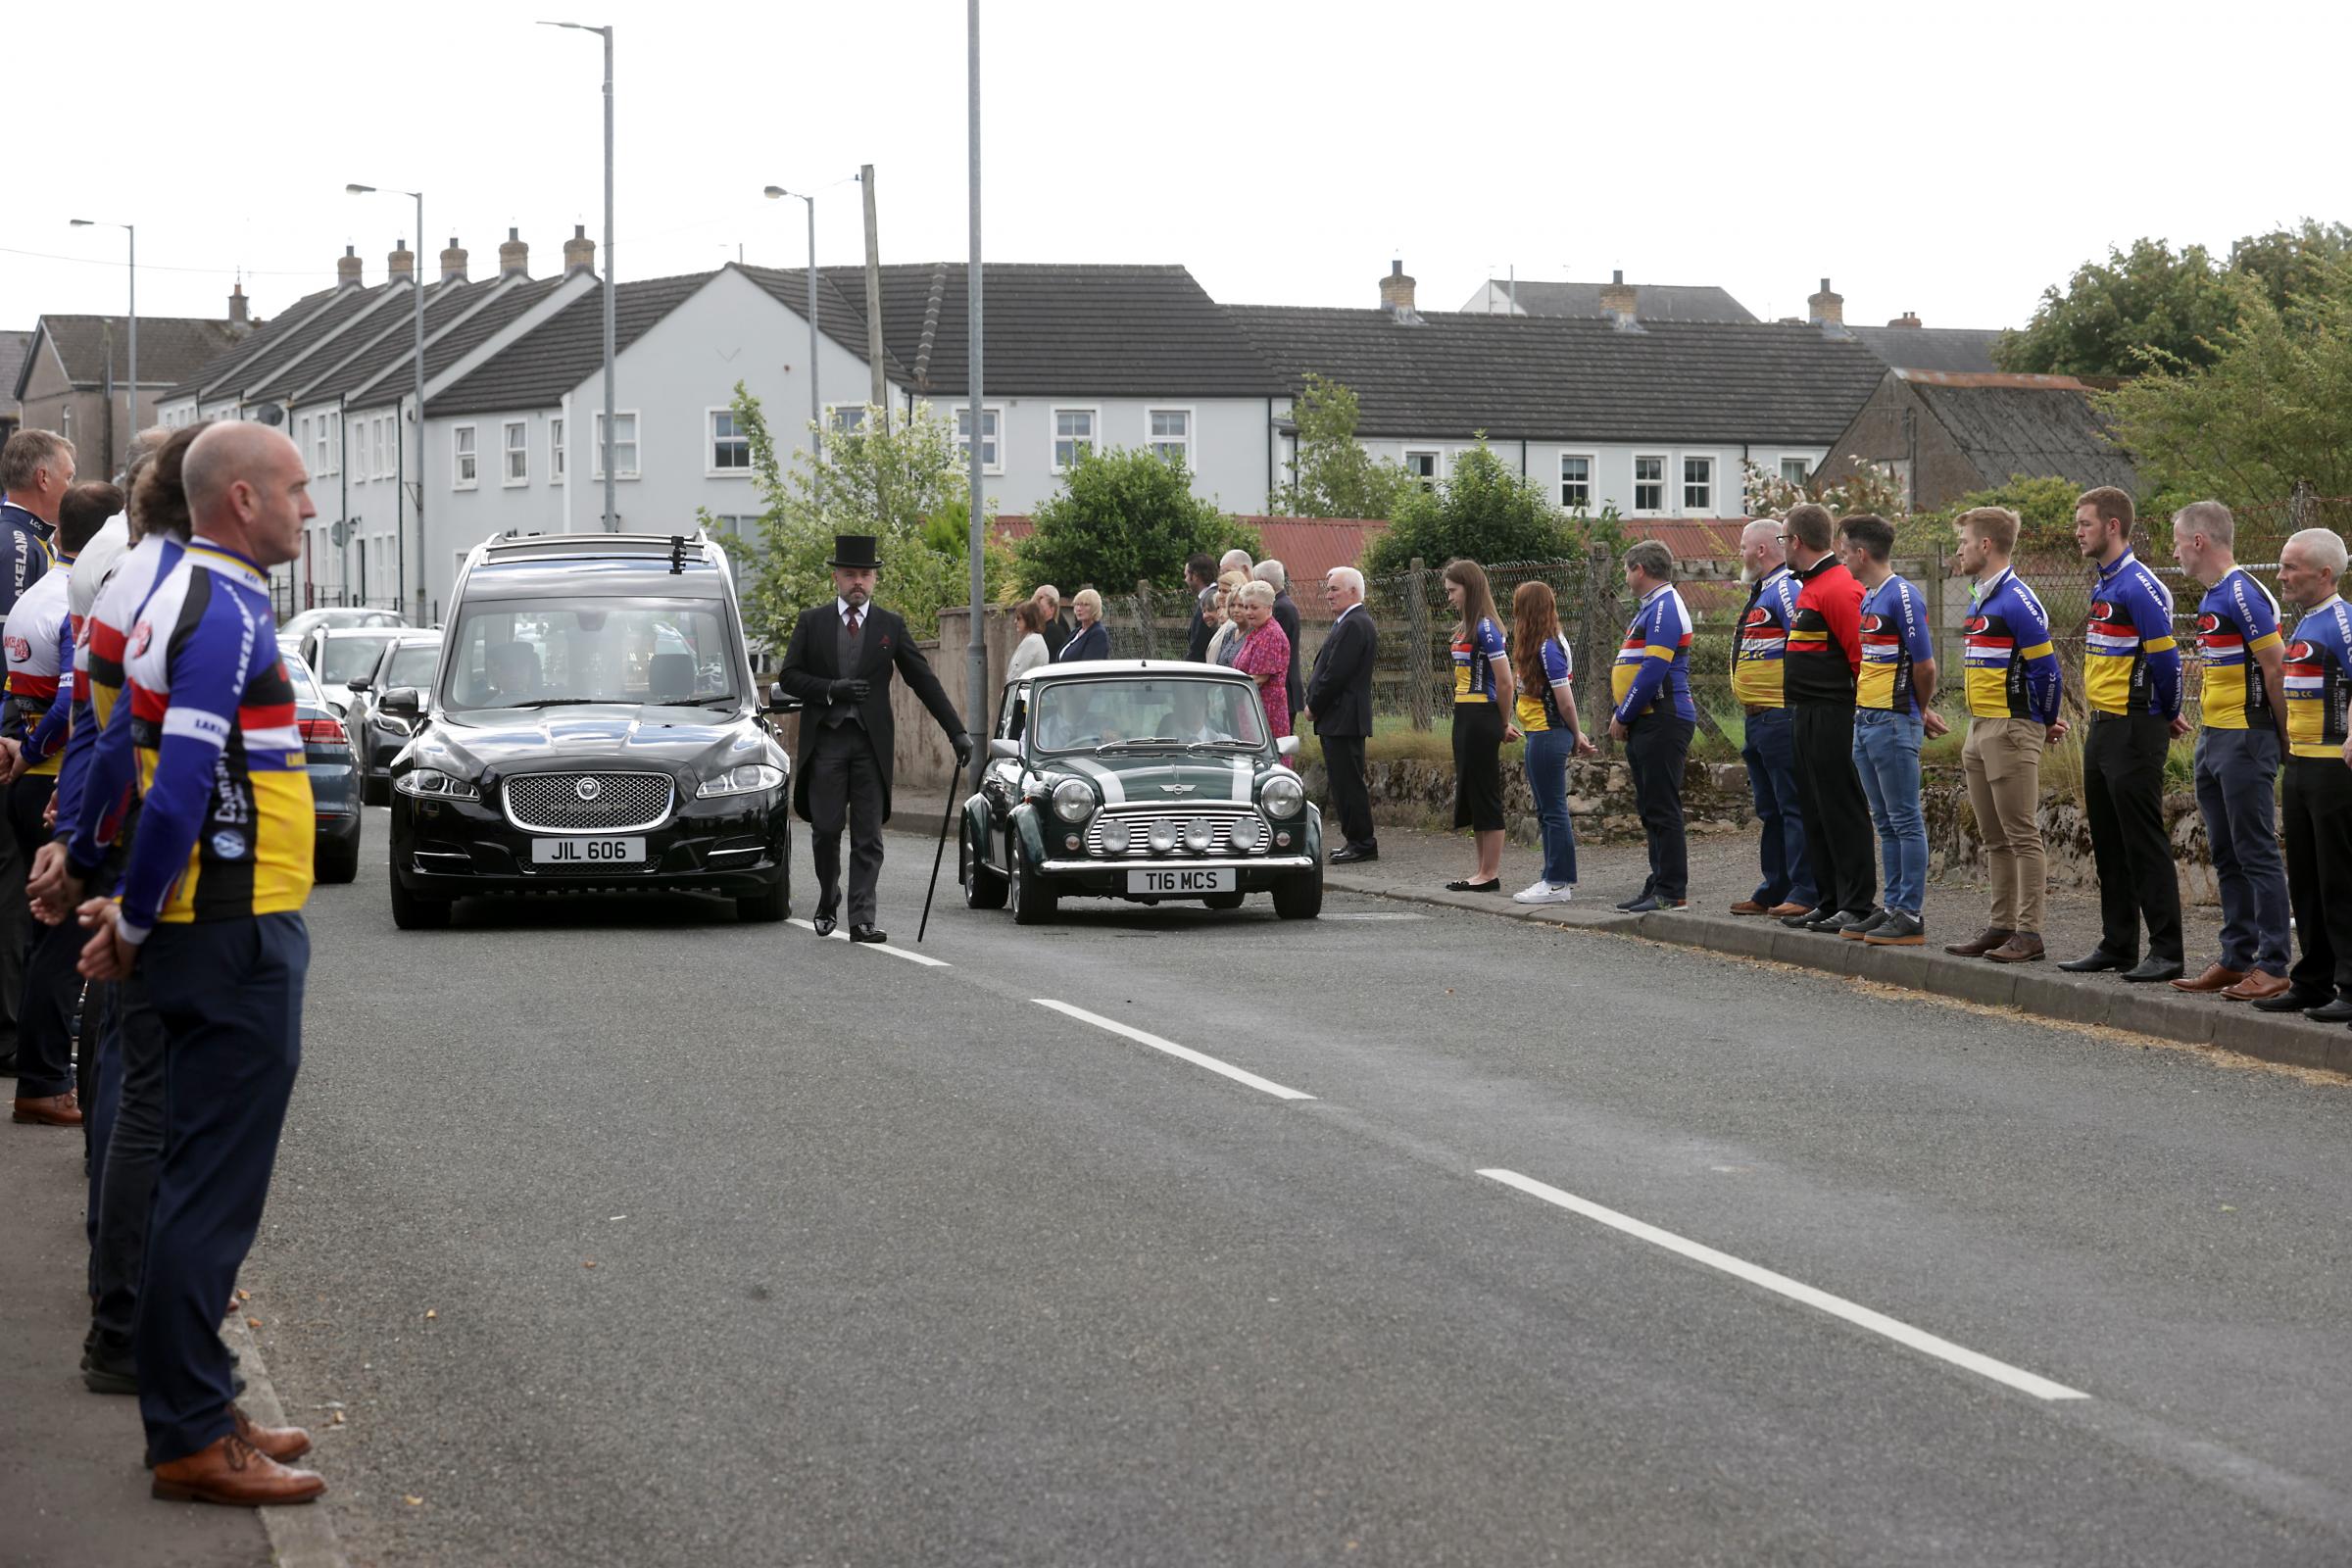 Members of Lakeland Cycle Club, line the route to pay their respects during the funeral of the late William Lyons.